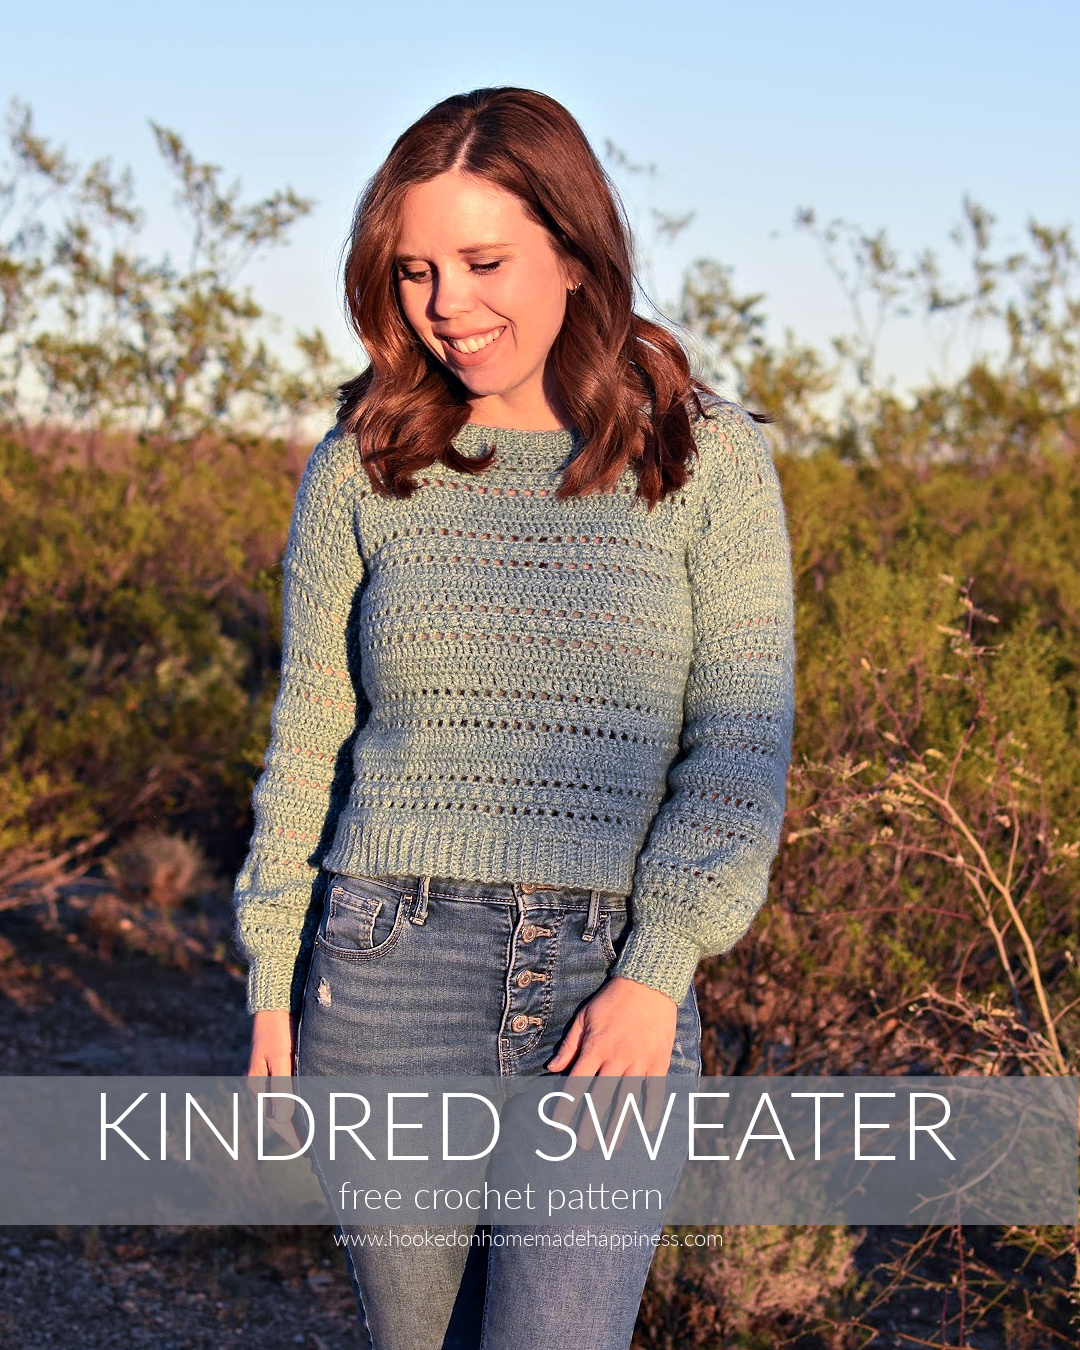 Kindred Sweater Crochet Pattern - Hooked on Homemade Happiness